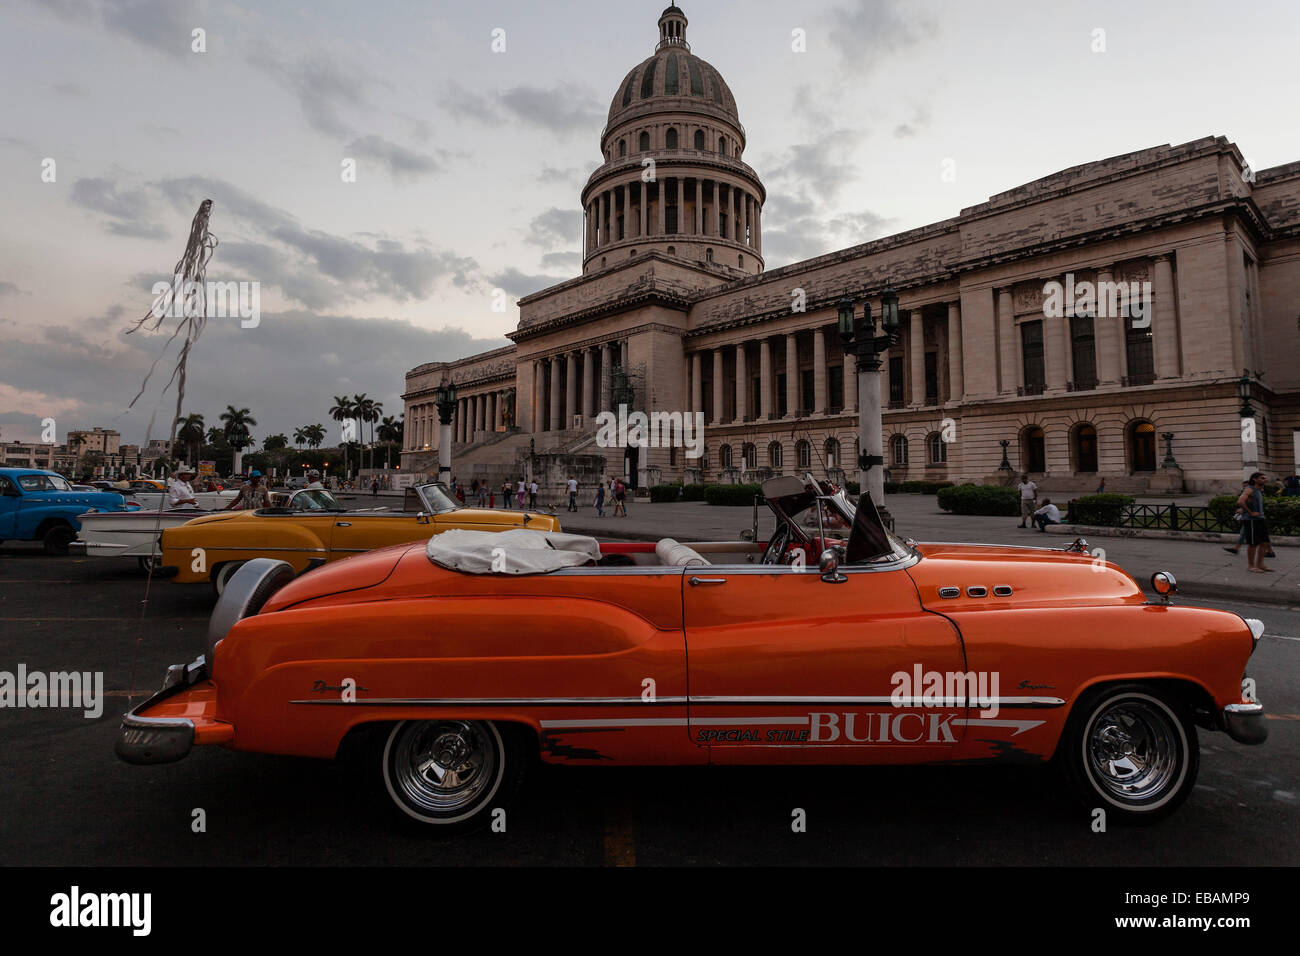 Vintage Buick from the 1950s in front of the Capitol at dusk, Havana, Cuba Stock Photo